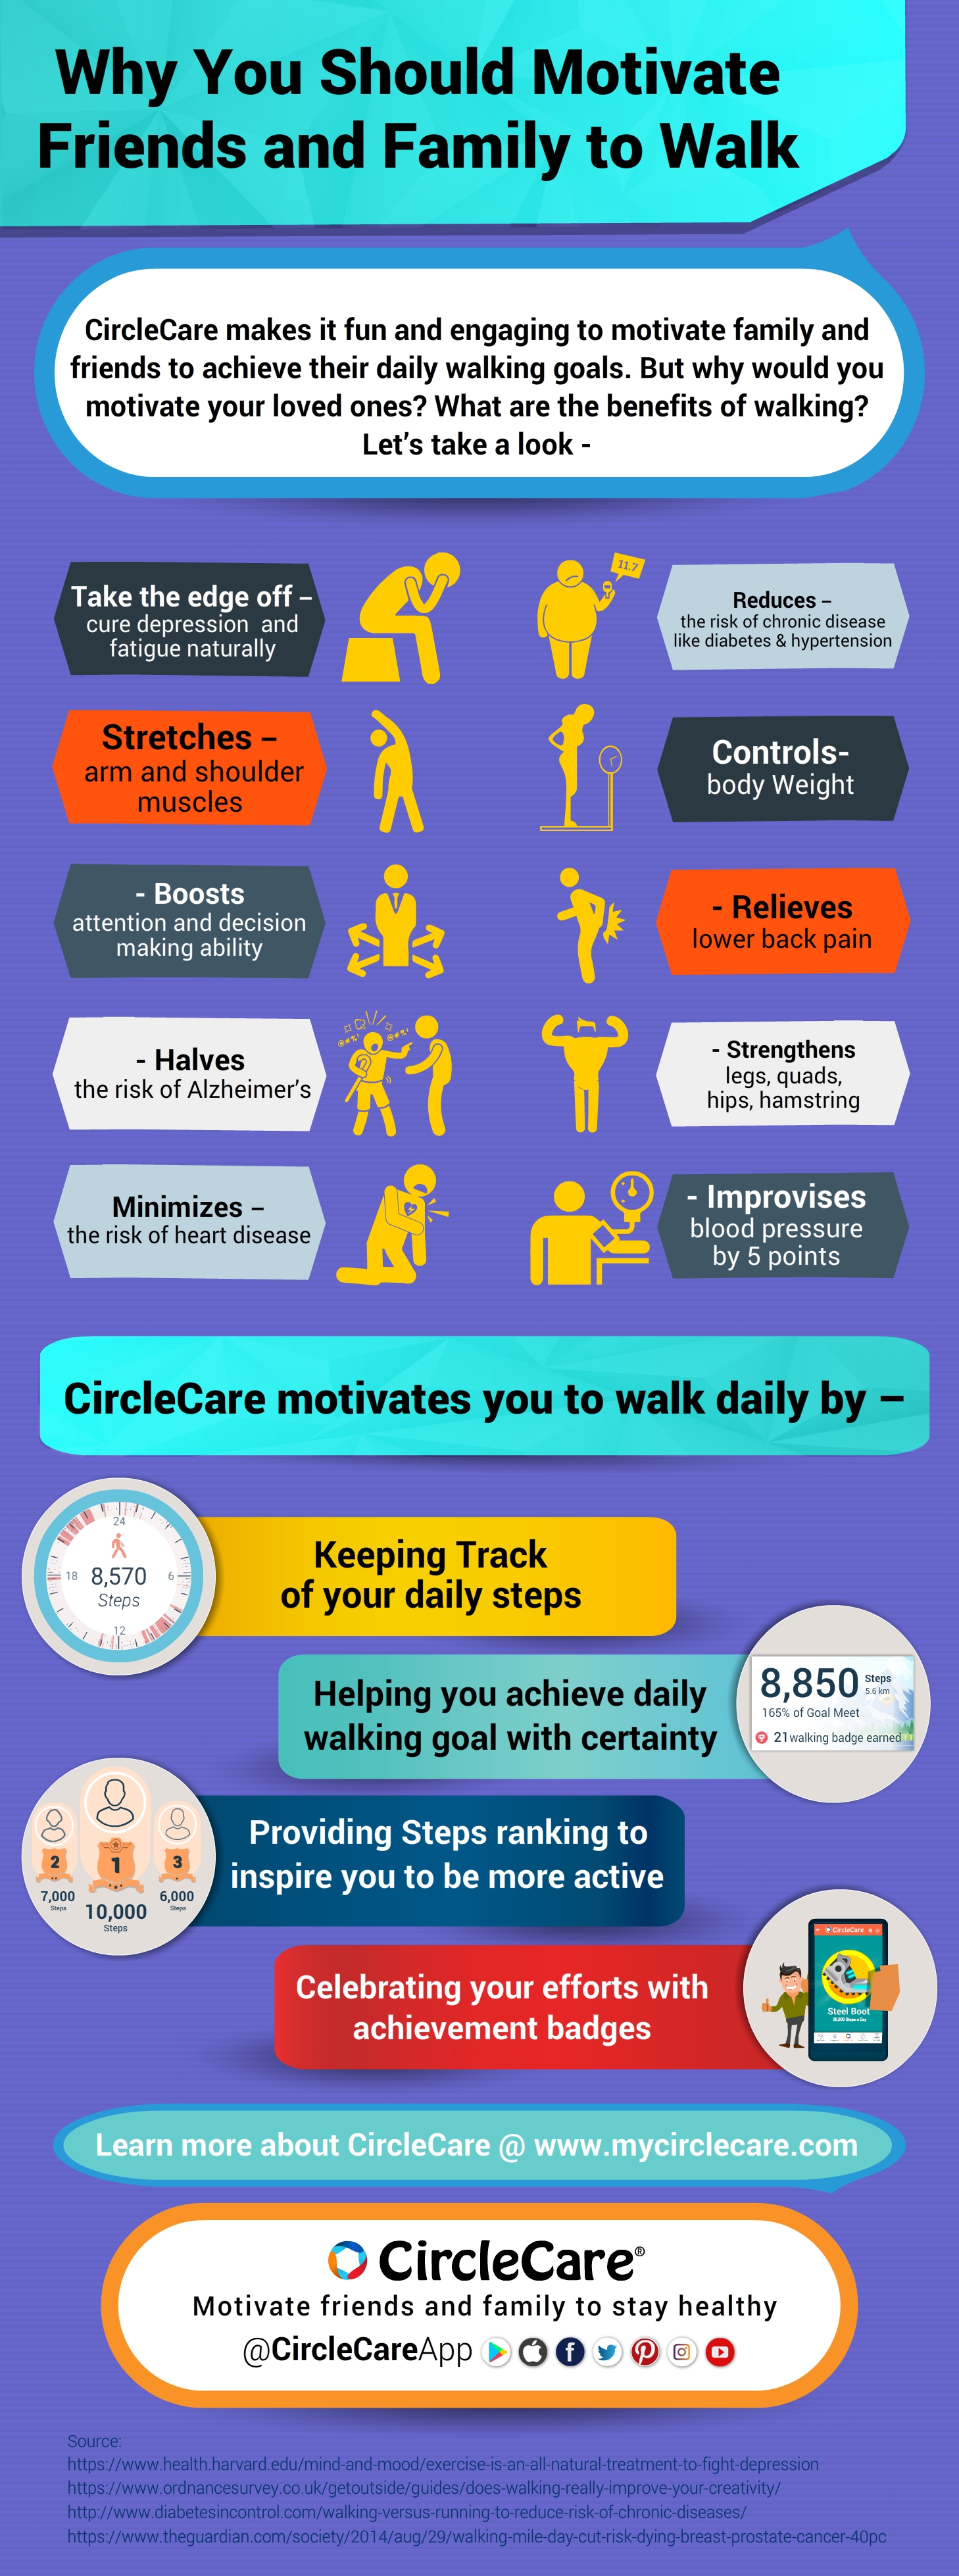 Why You Should Motivate Your Family and Friends to Walk-CircleCare